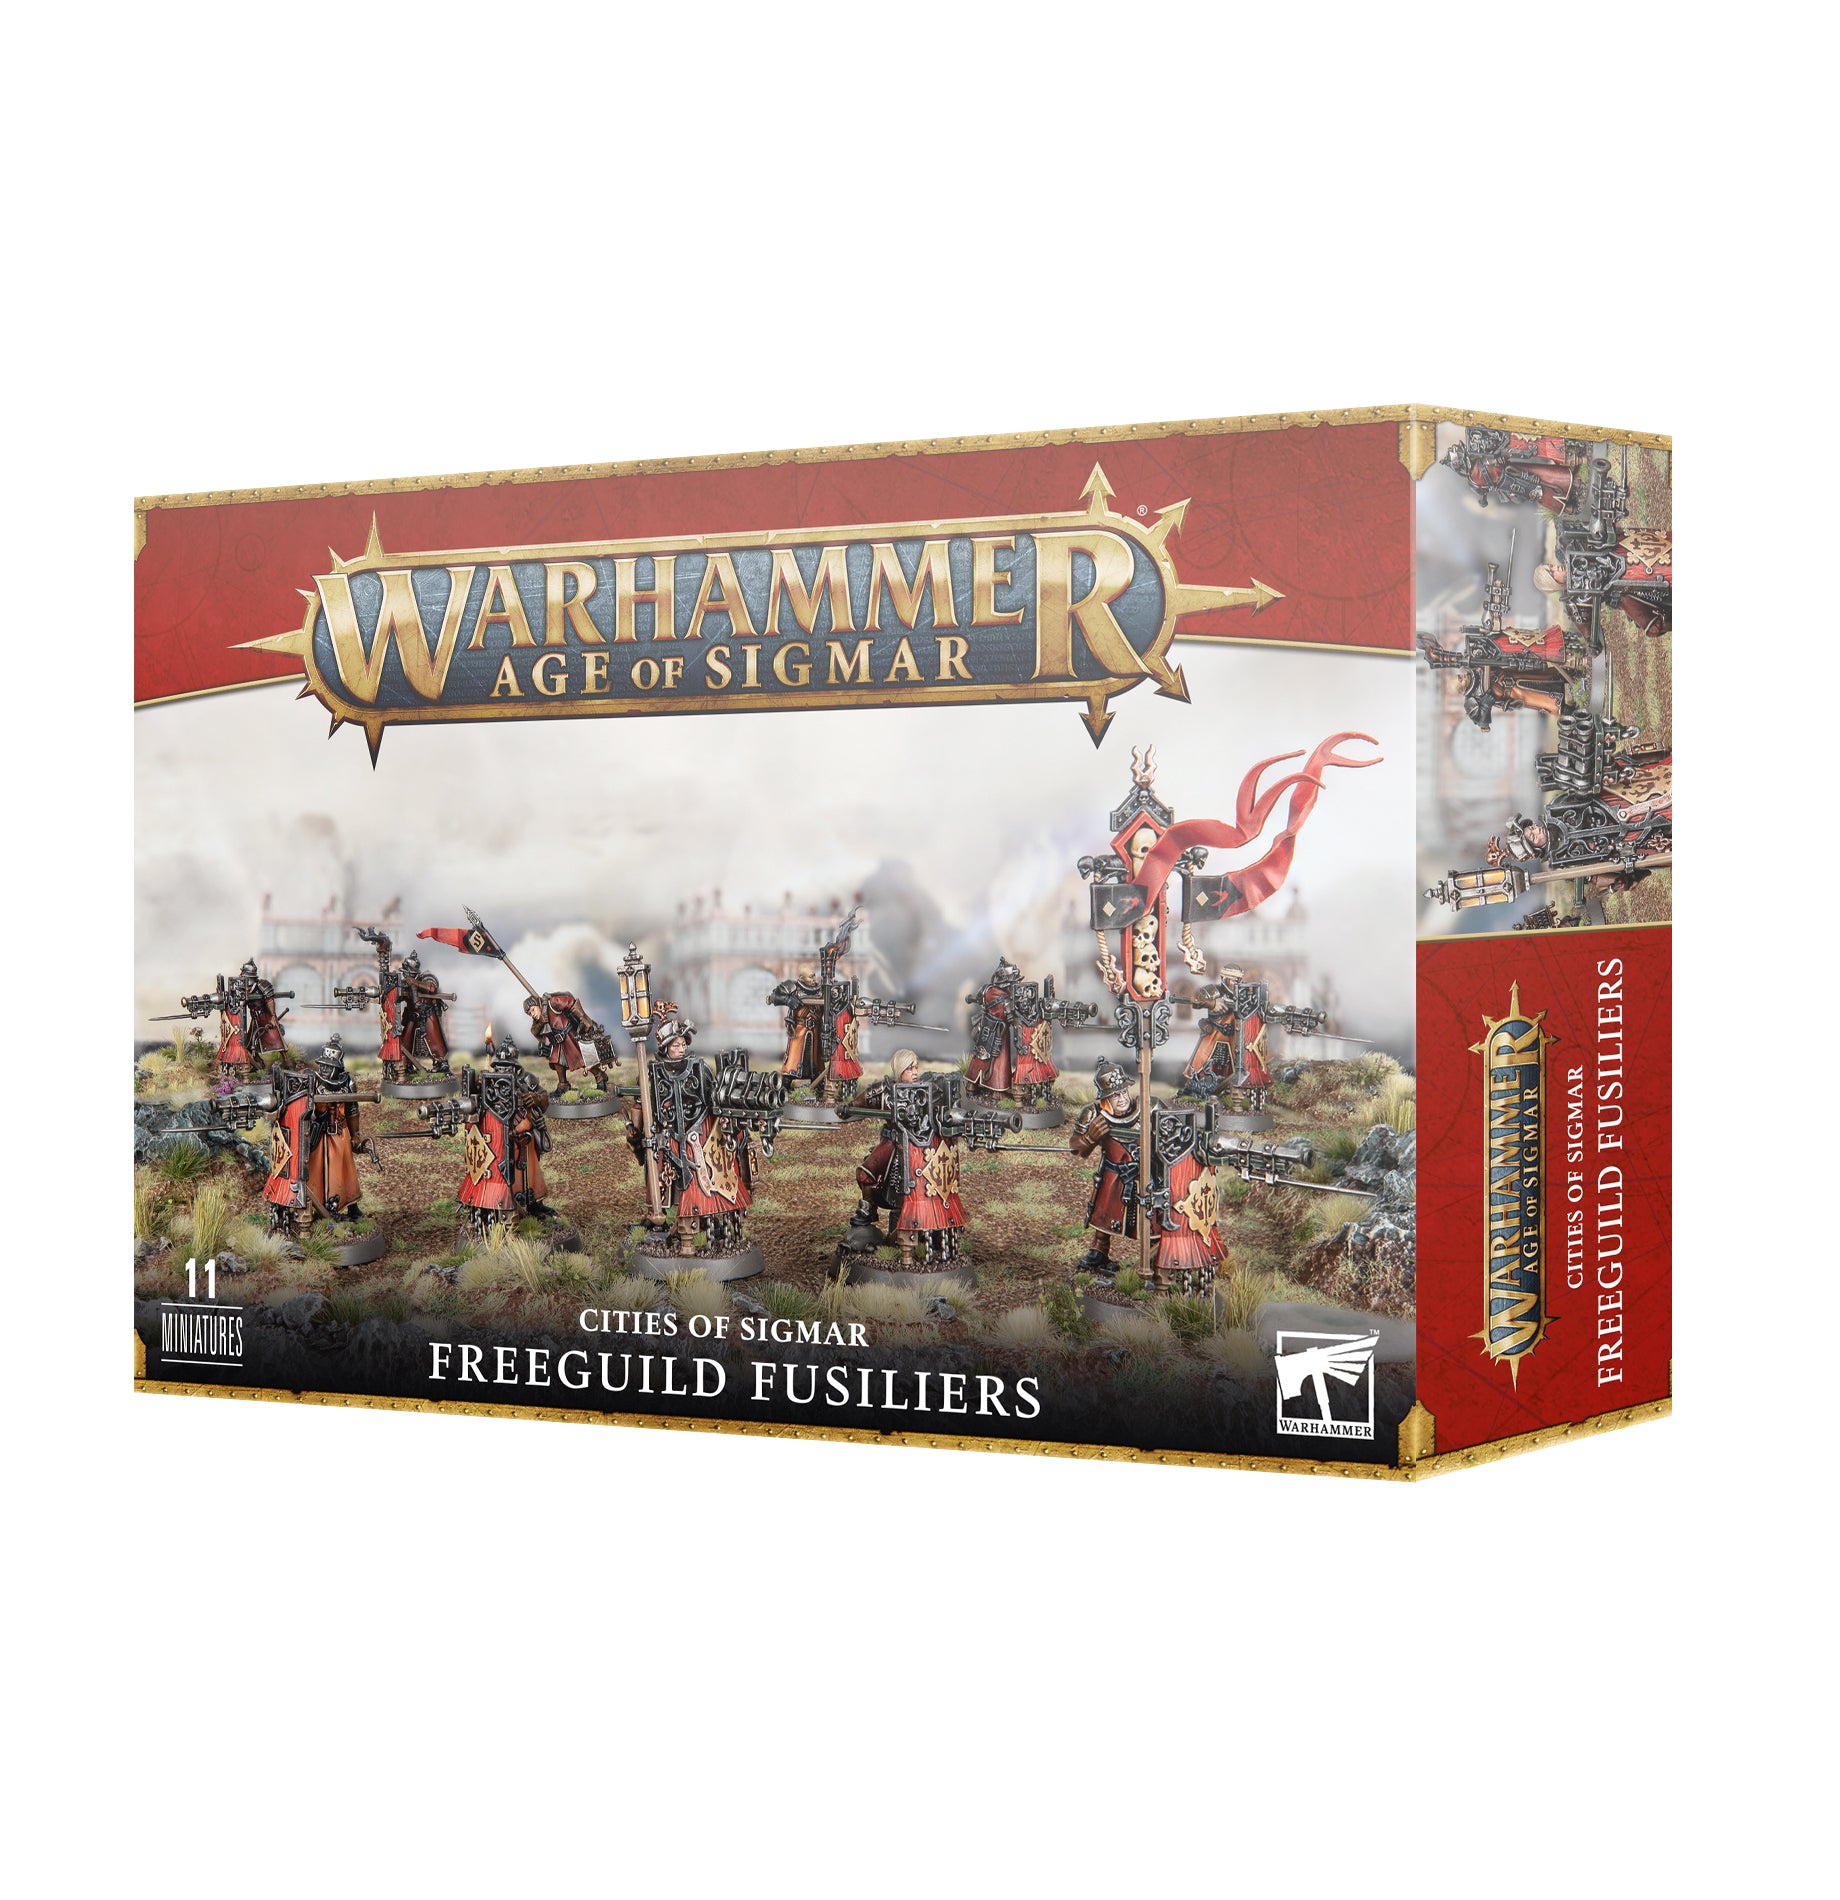 Cities of Sigmar: Freeguild Fusilliers - Release Date 11/11/23 - Loaded Dice Barry Vale of Glamorgan CF64 3HD